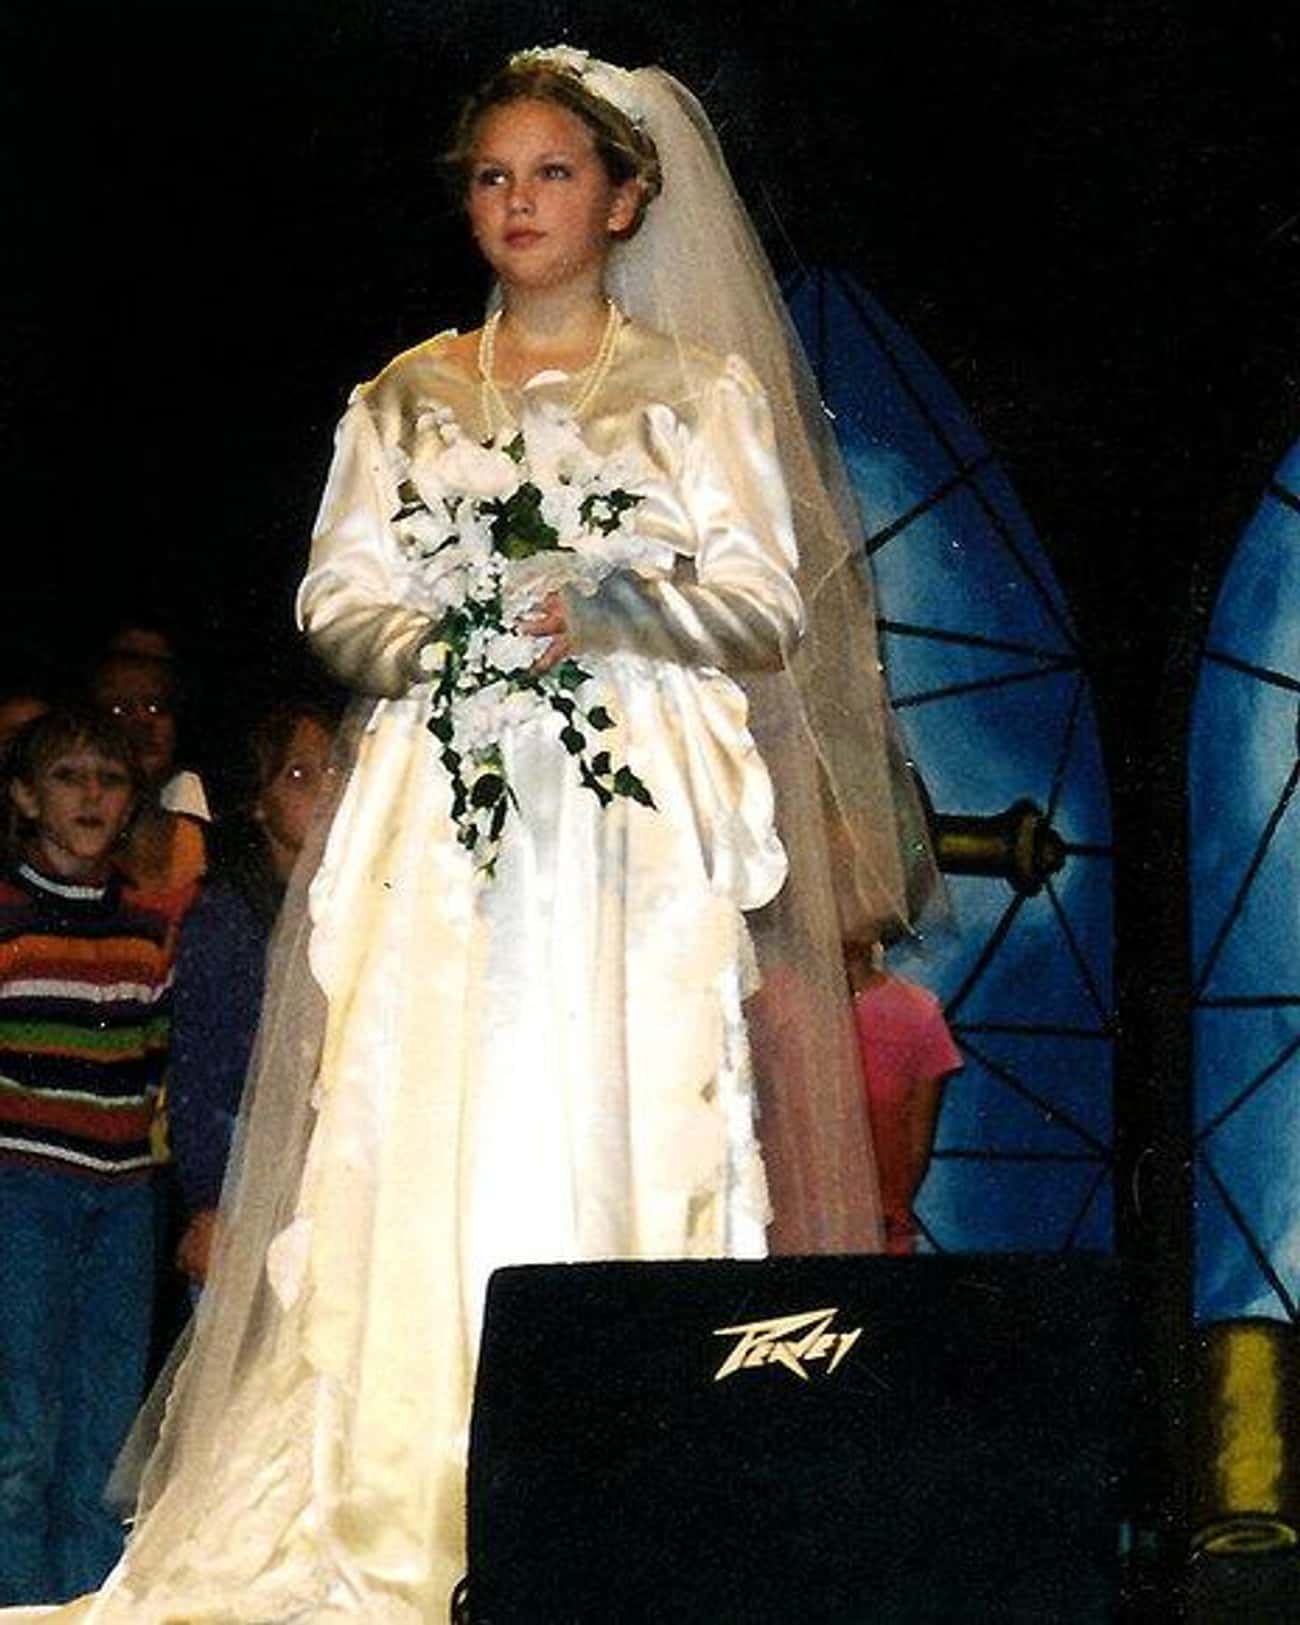 Young Taylor Swift in a Wedding Dress